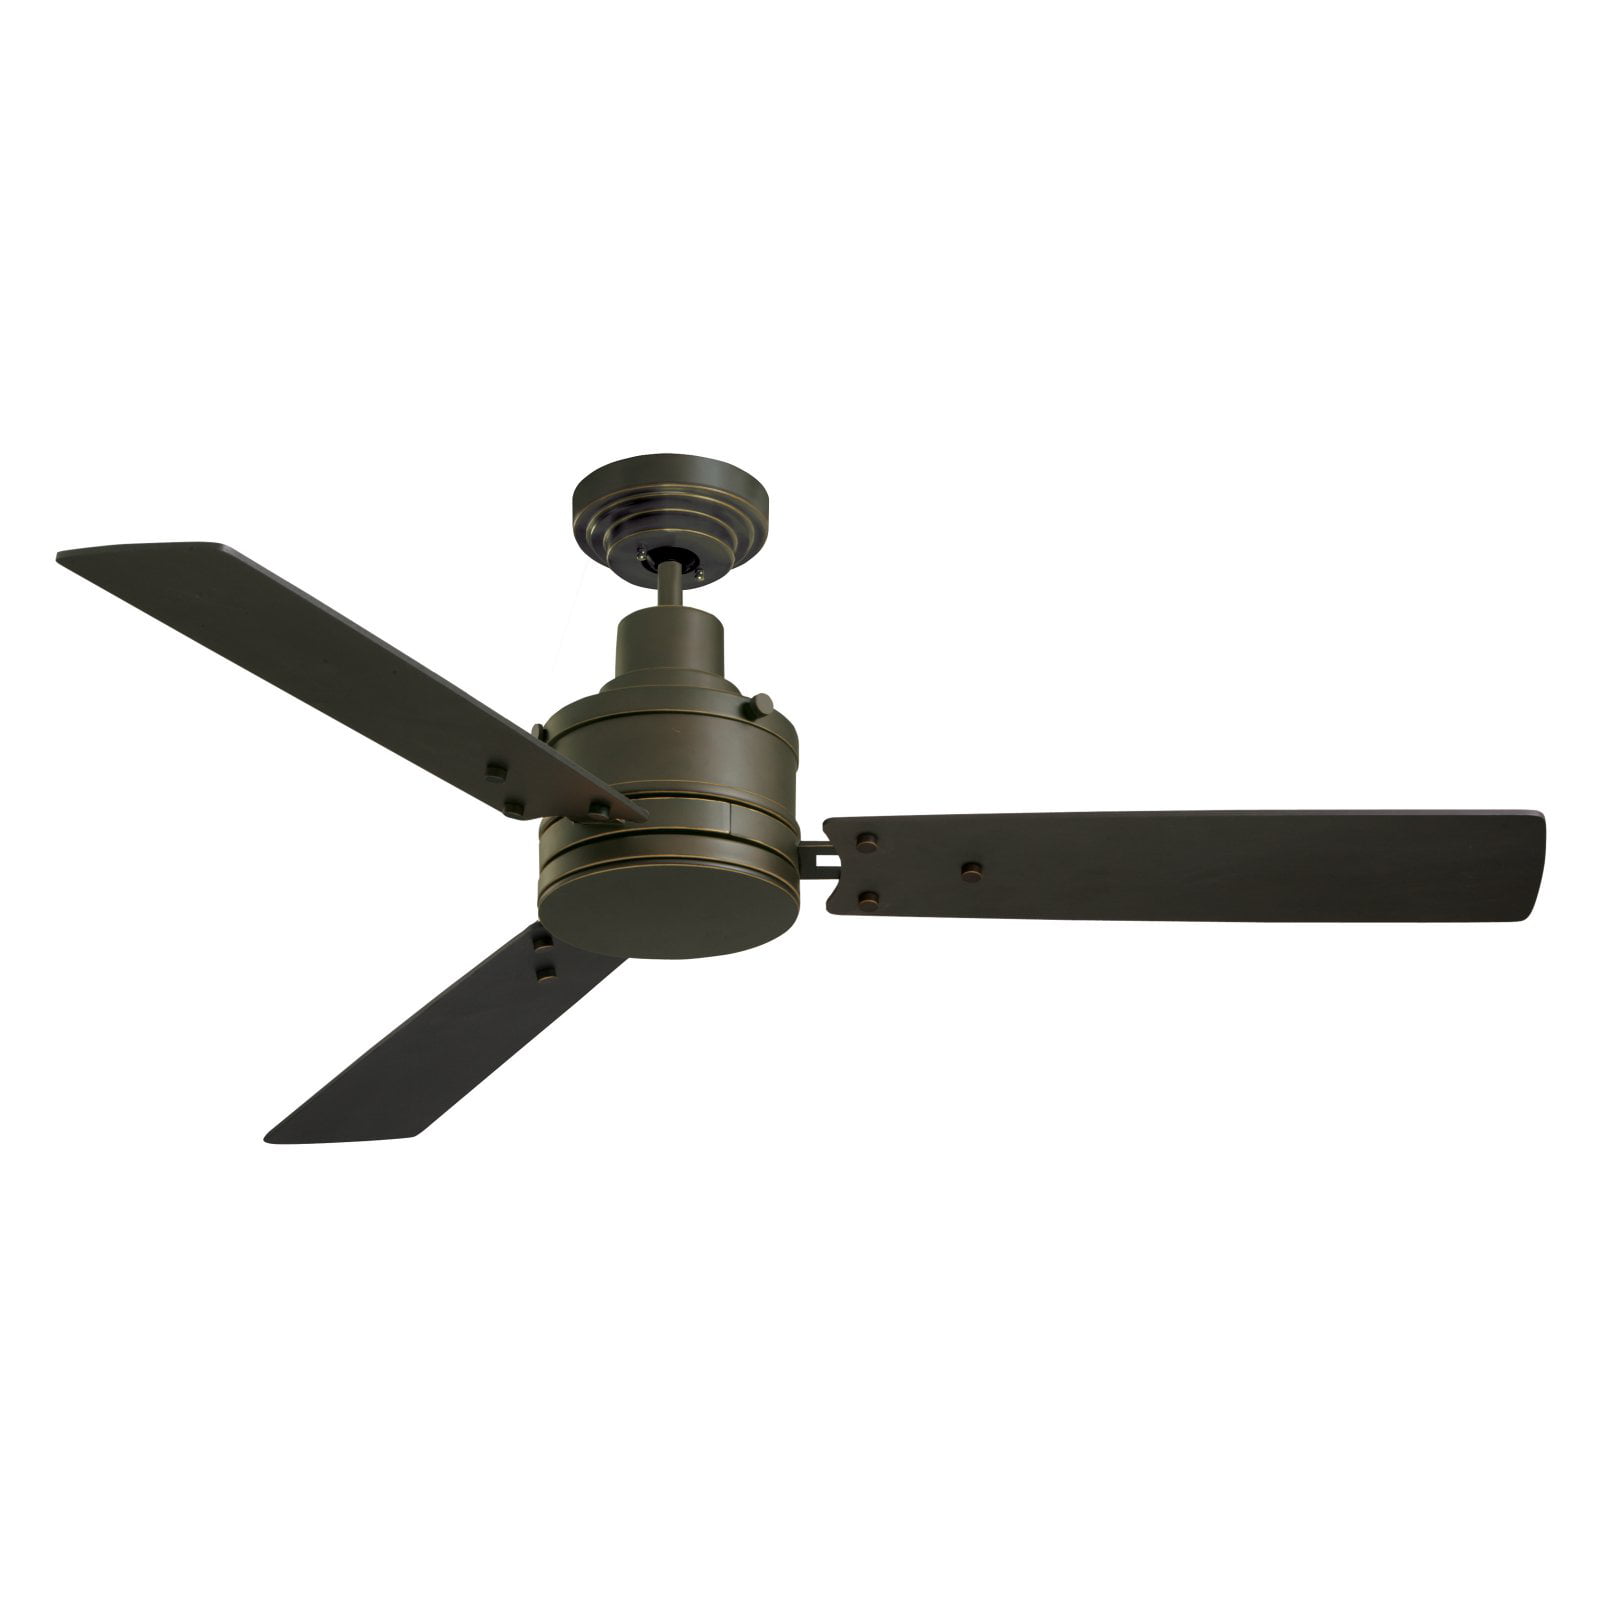 Emerson 54" Remote Control Ceiling Fan & Light Highpointe Brushed Steel CF205BS 